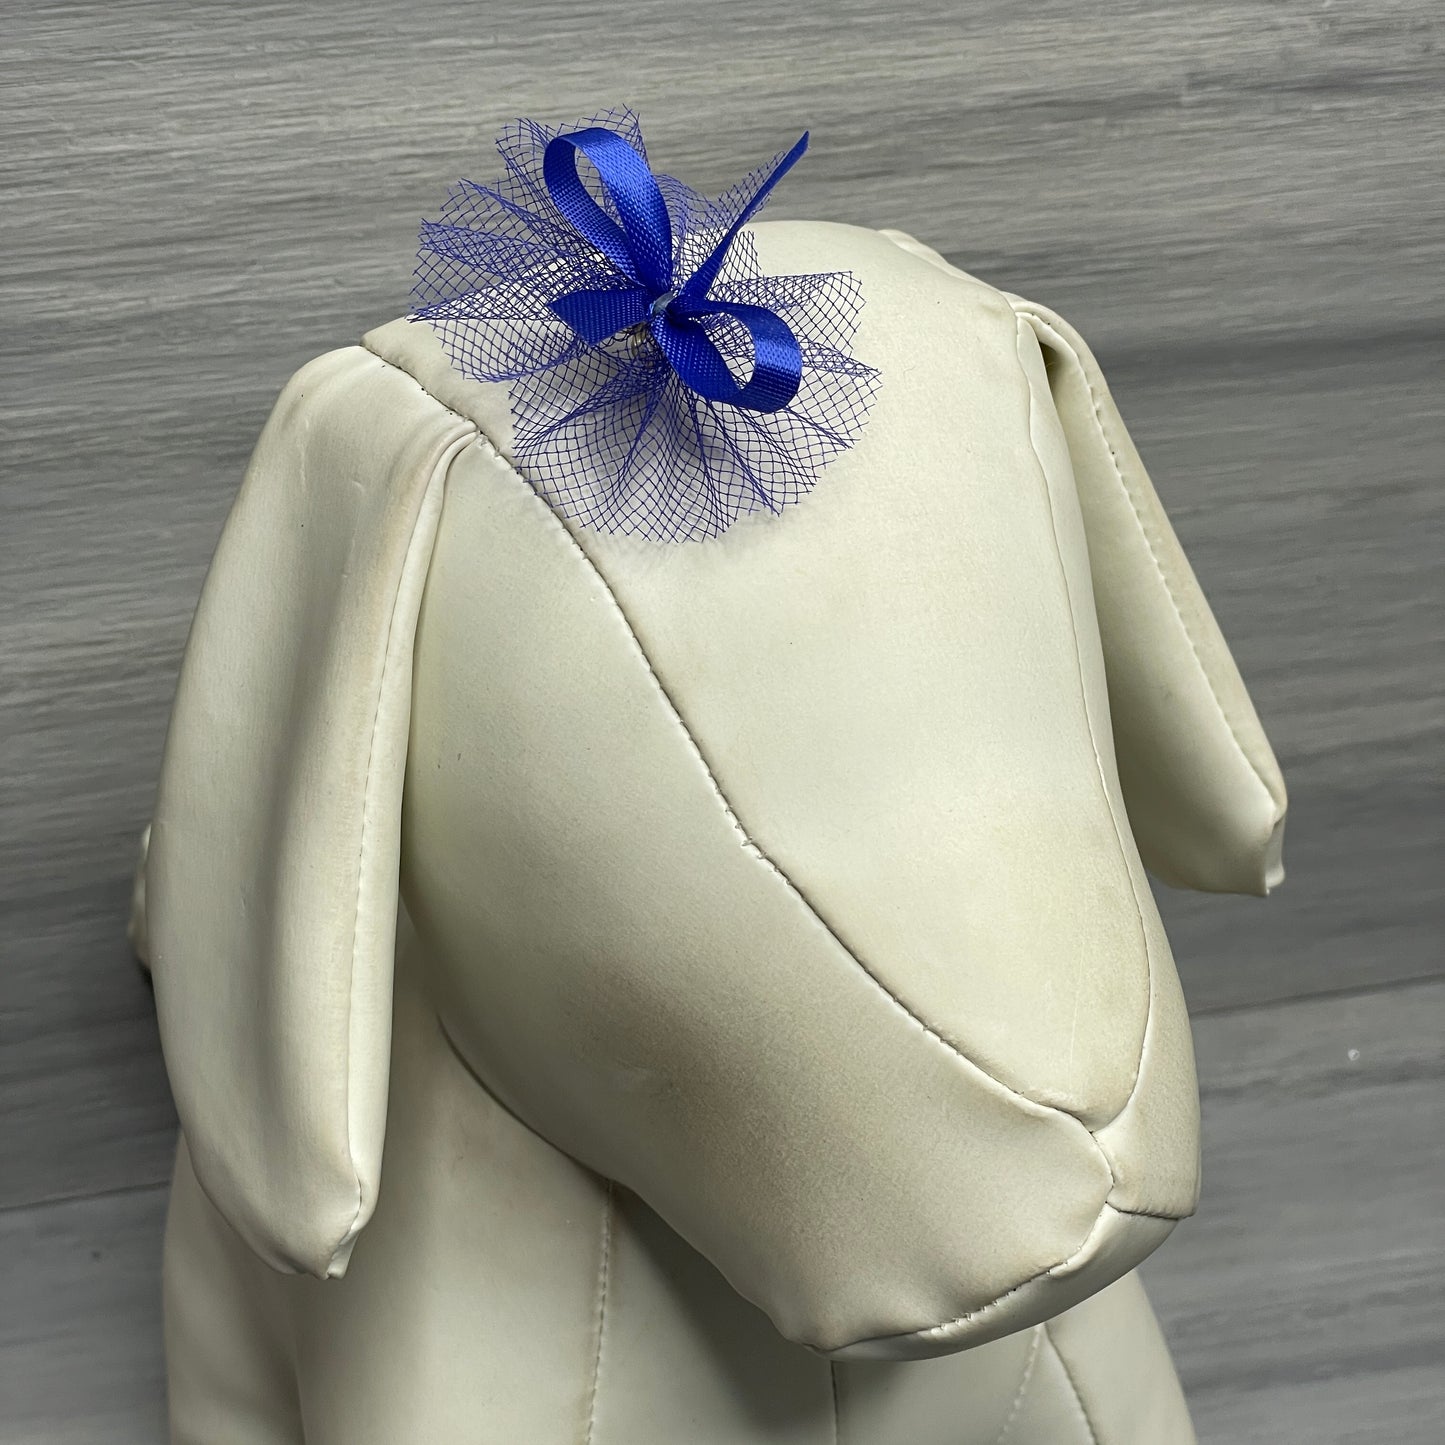 Combination Of Royal Blue and Light Blue Bows - Includes 7/16, 5/8 & Petite - 50 Bows